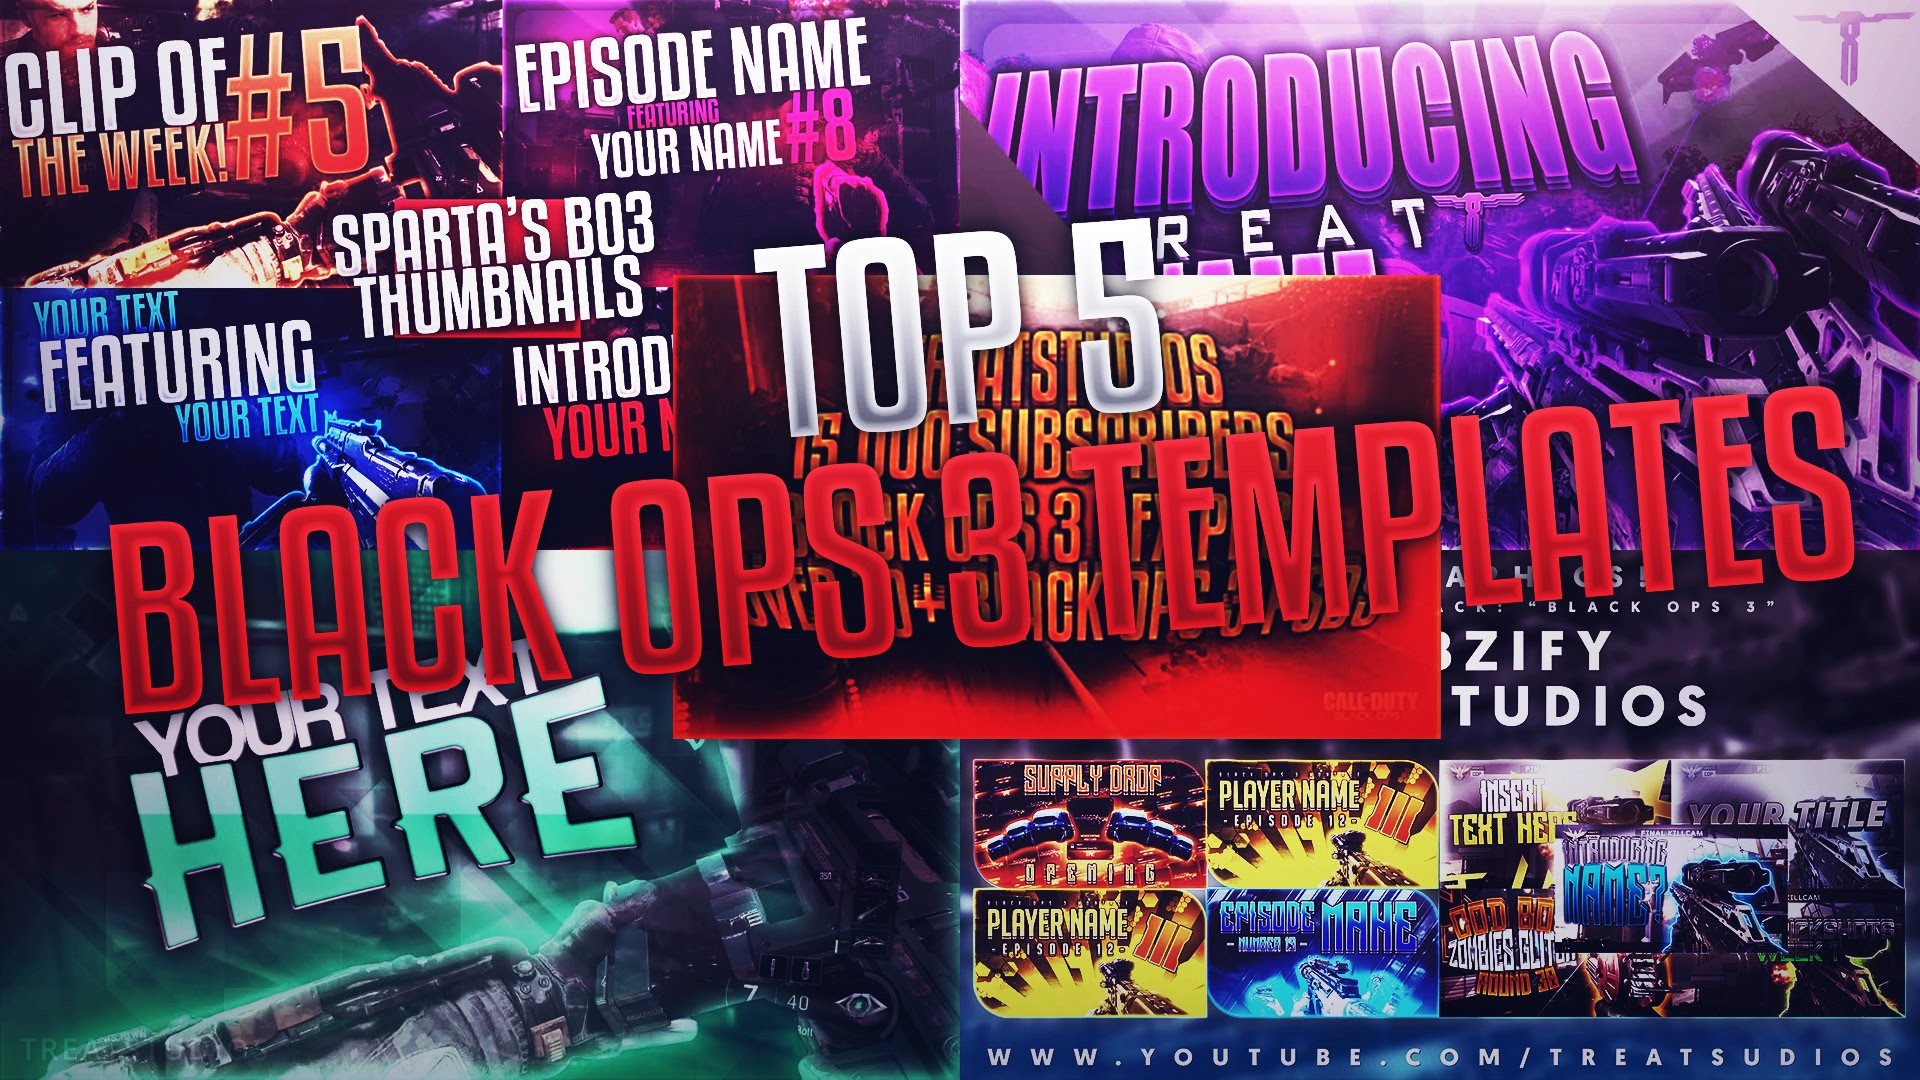 1920x1080 Free GFX: Top 5 Free Call Of Duty Black Ops 3 Templates - BO3 Templates #1  (2016) - YouTube